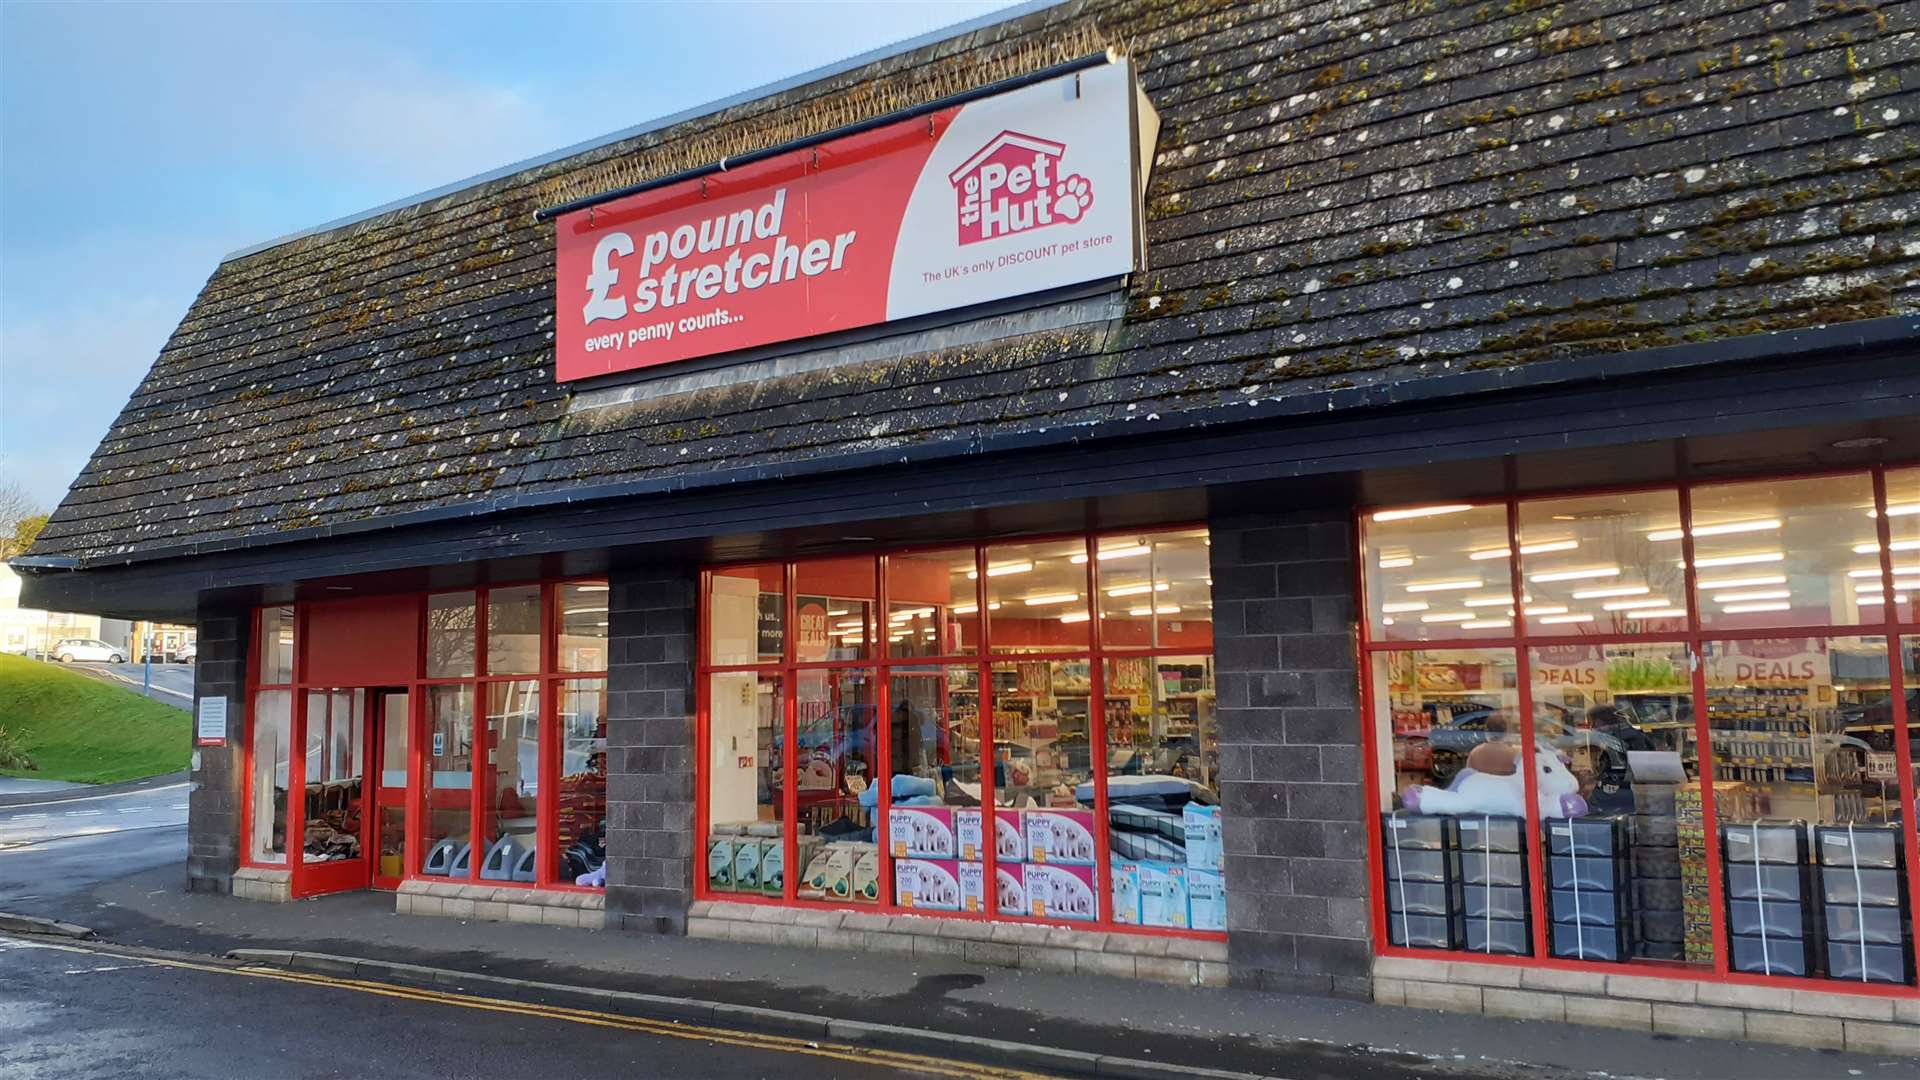 The Poundstretcher store in Wick will accommodate the new post office.